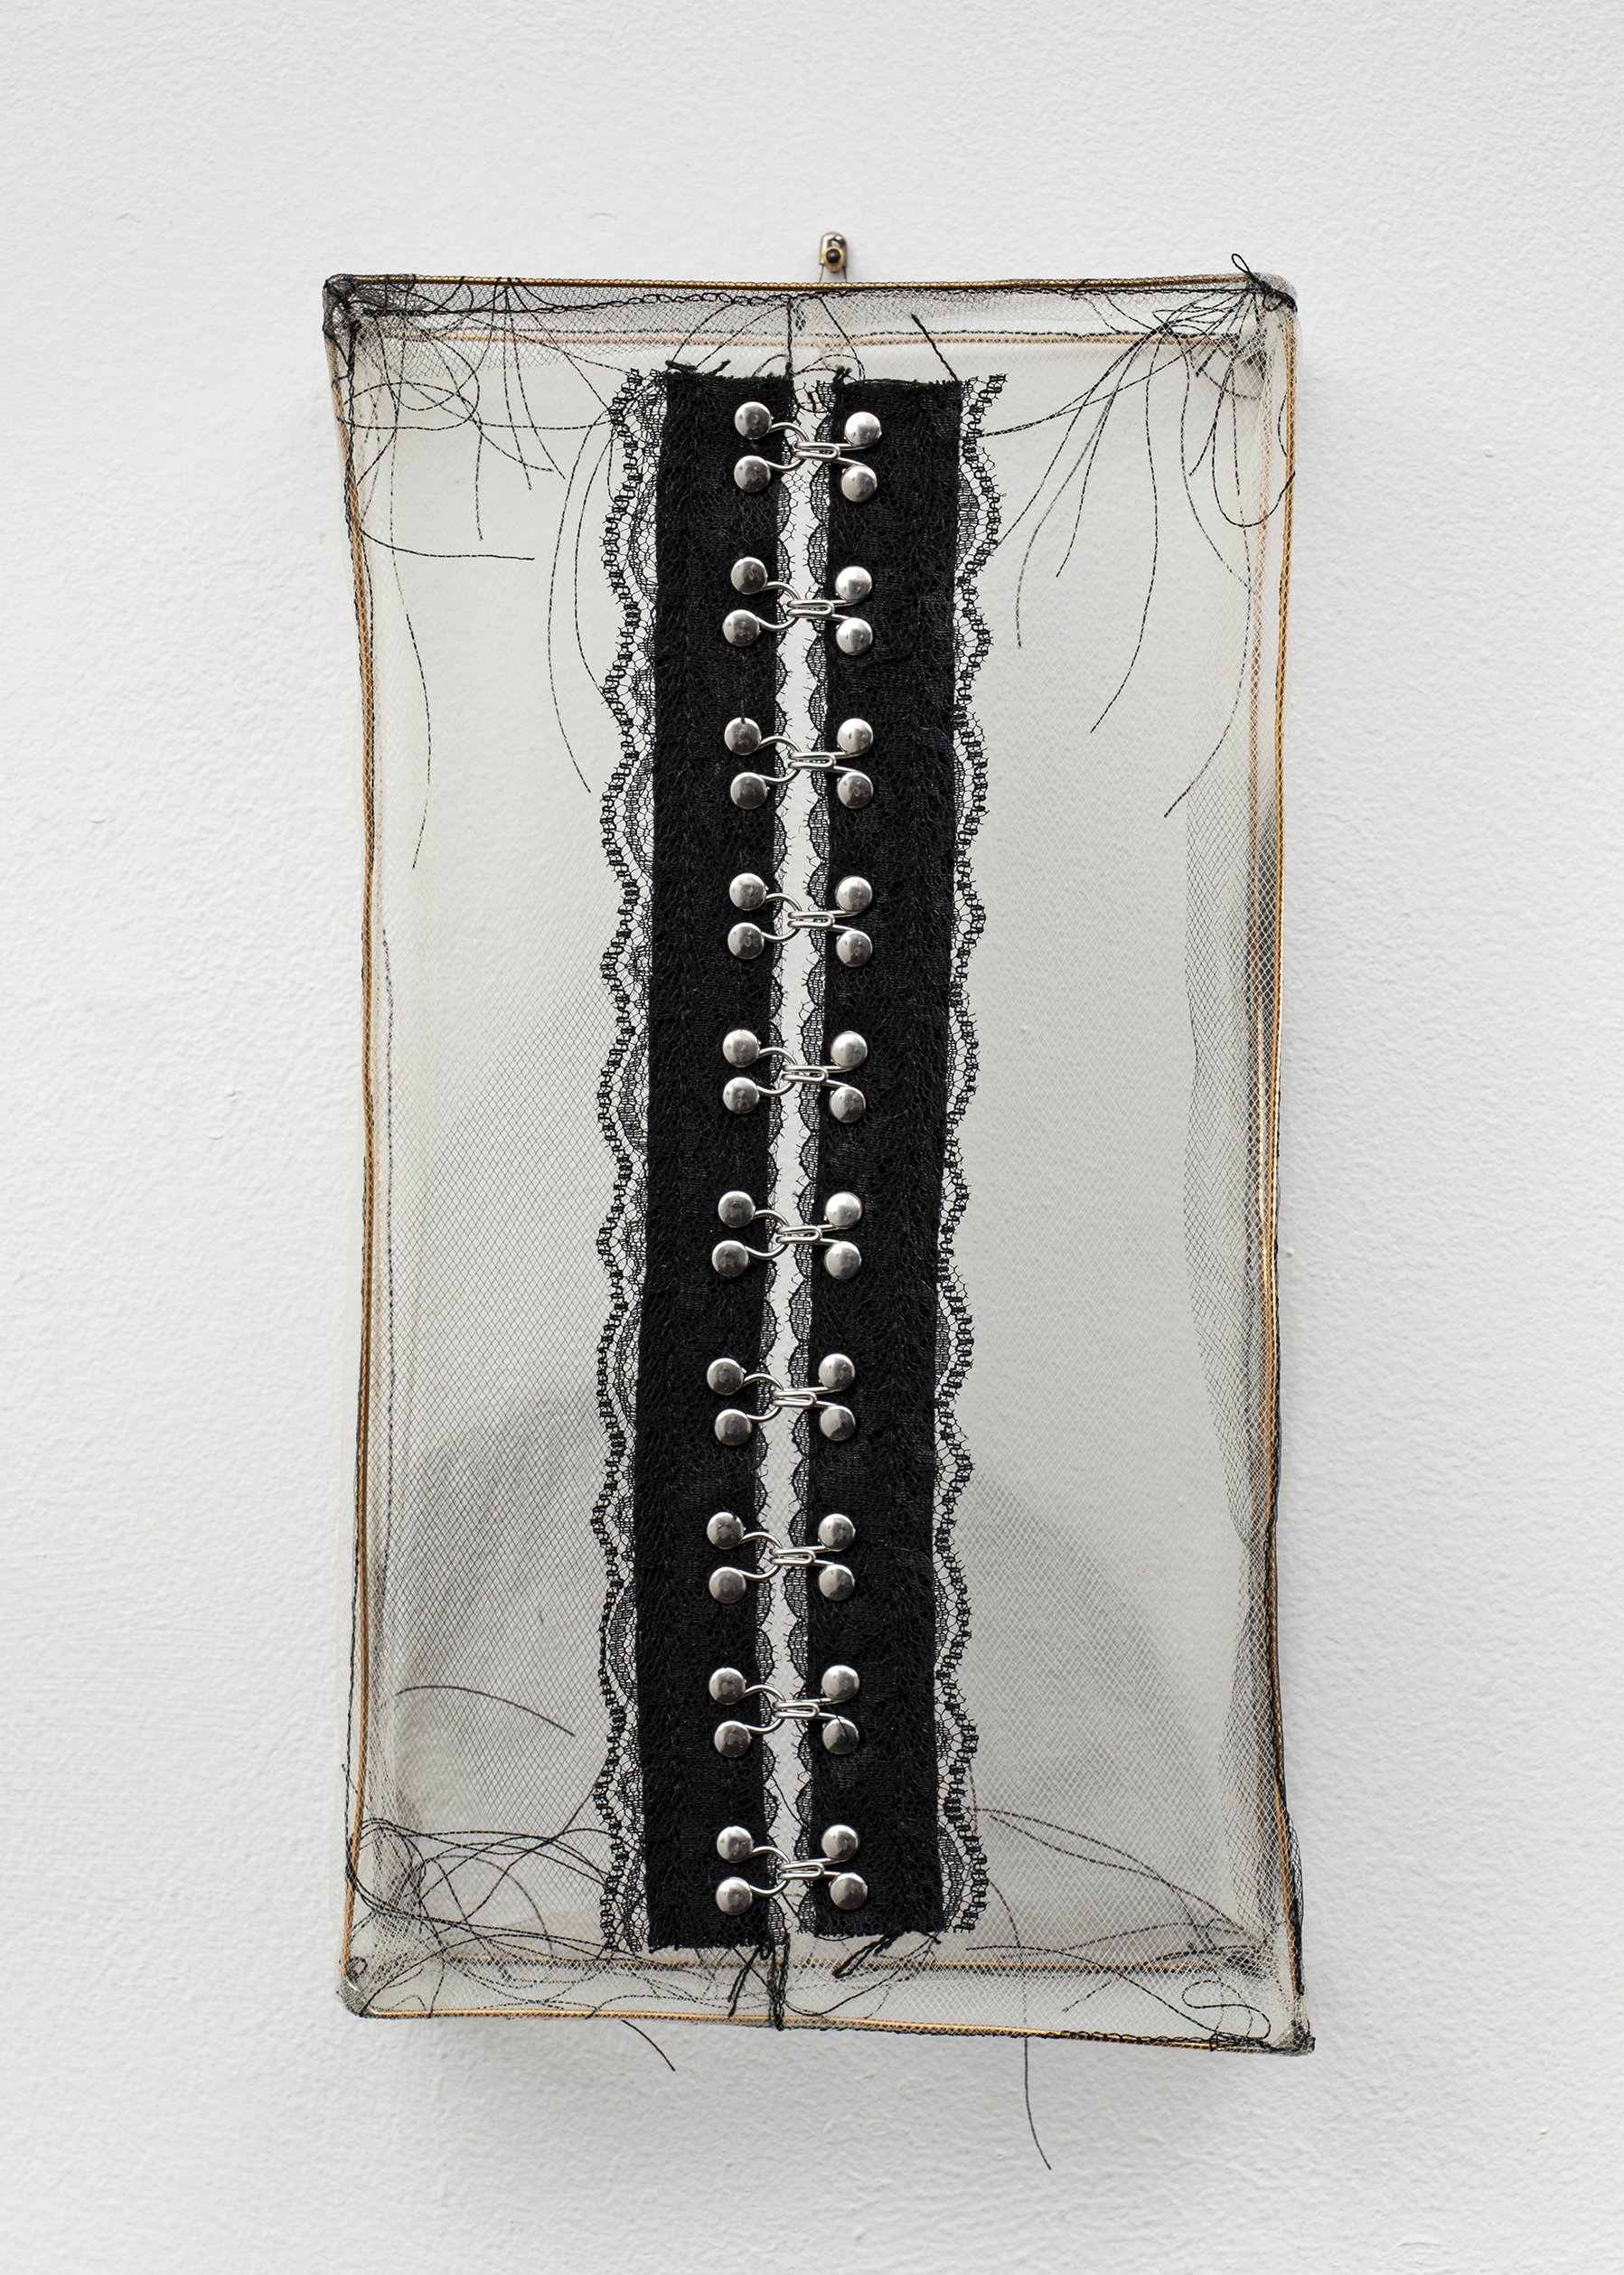  Covey Gong, Untitled, 2022. Acrylic, nylon, cotton, bronze, tin. 11 x 6 x 2.25 inches. 